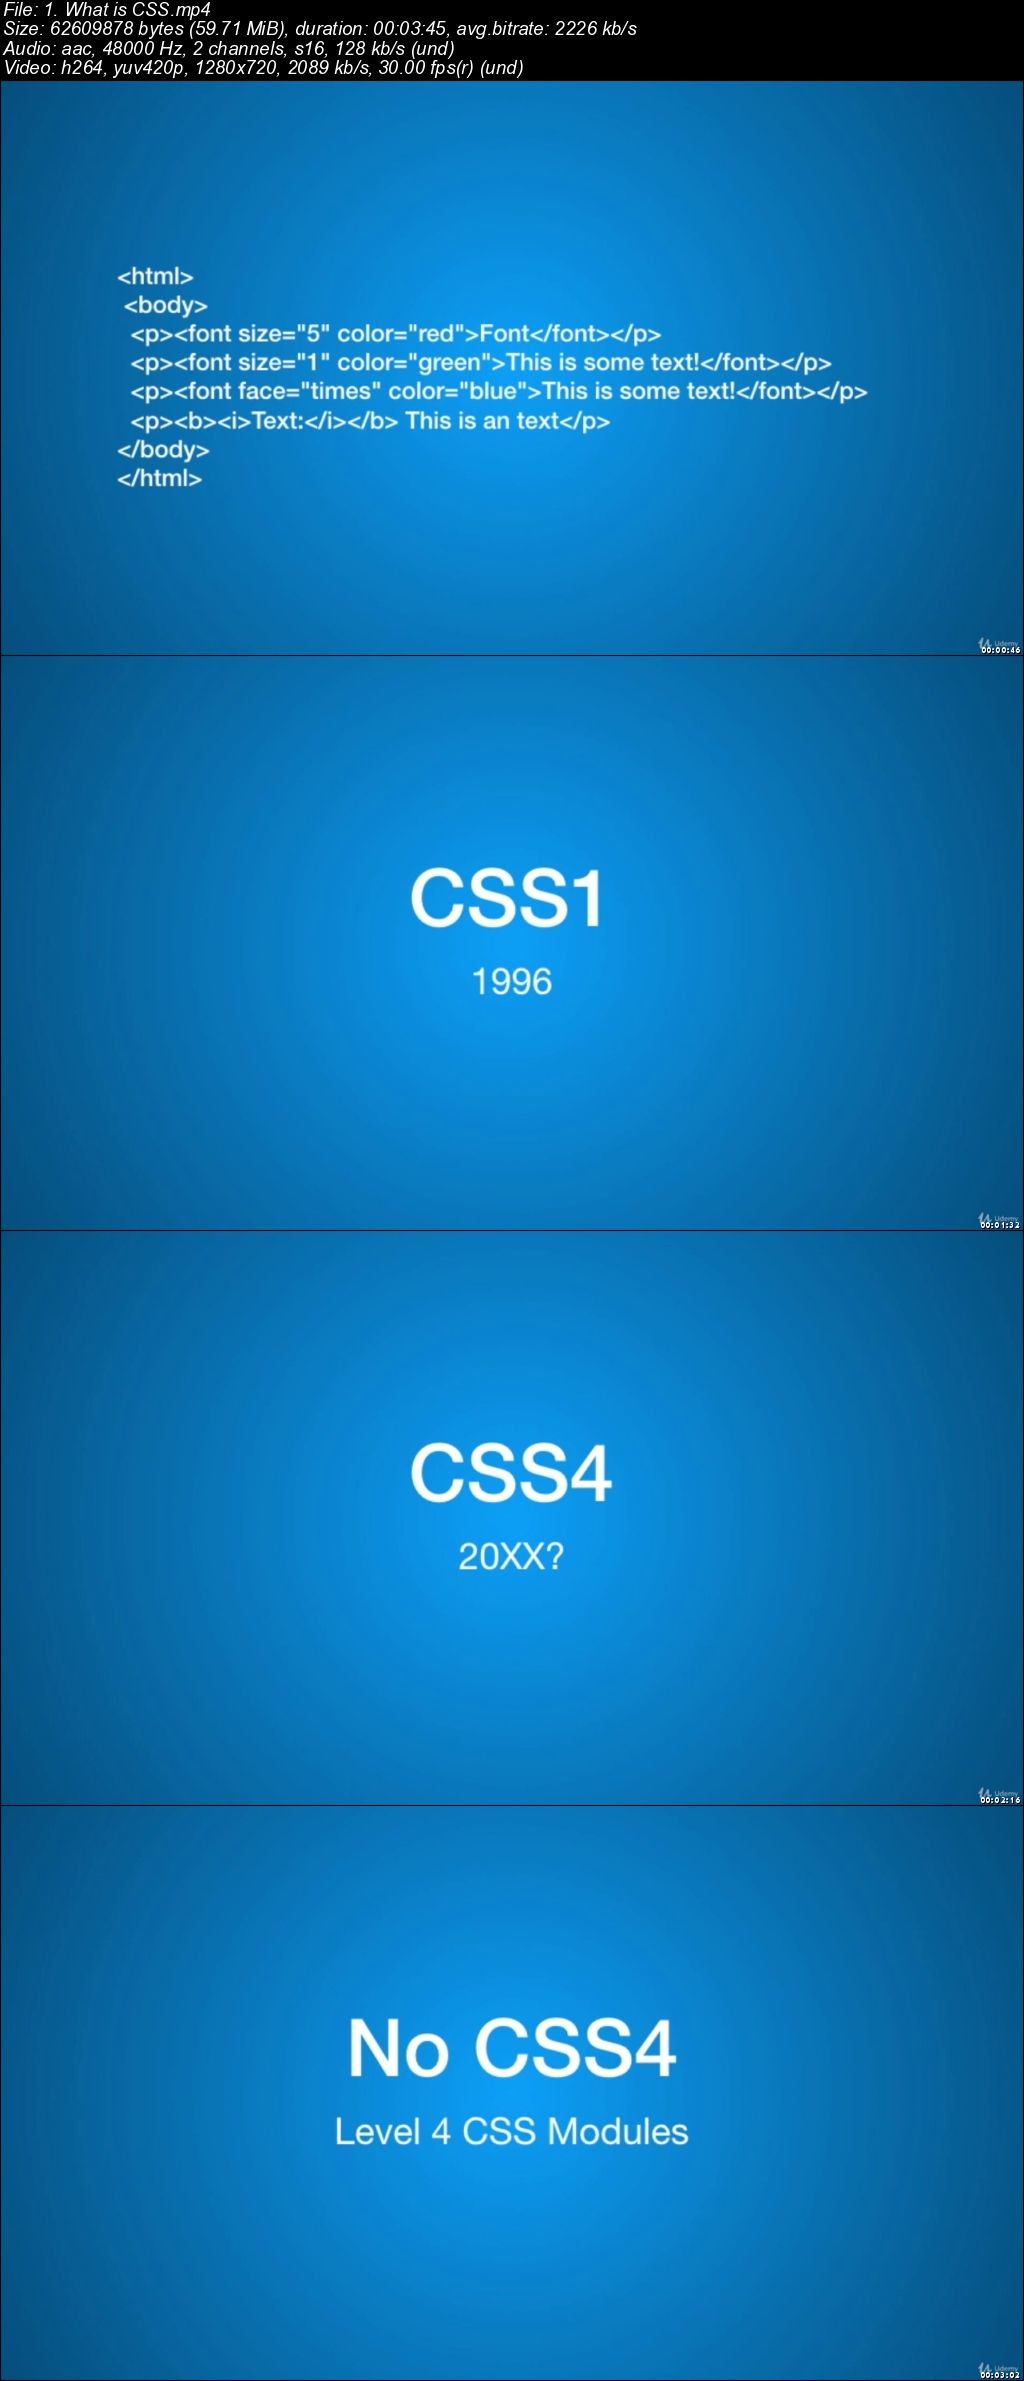  Learn CSS3 Selectors, Cascade, Specificity and CSS Basics 